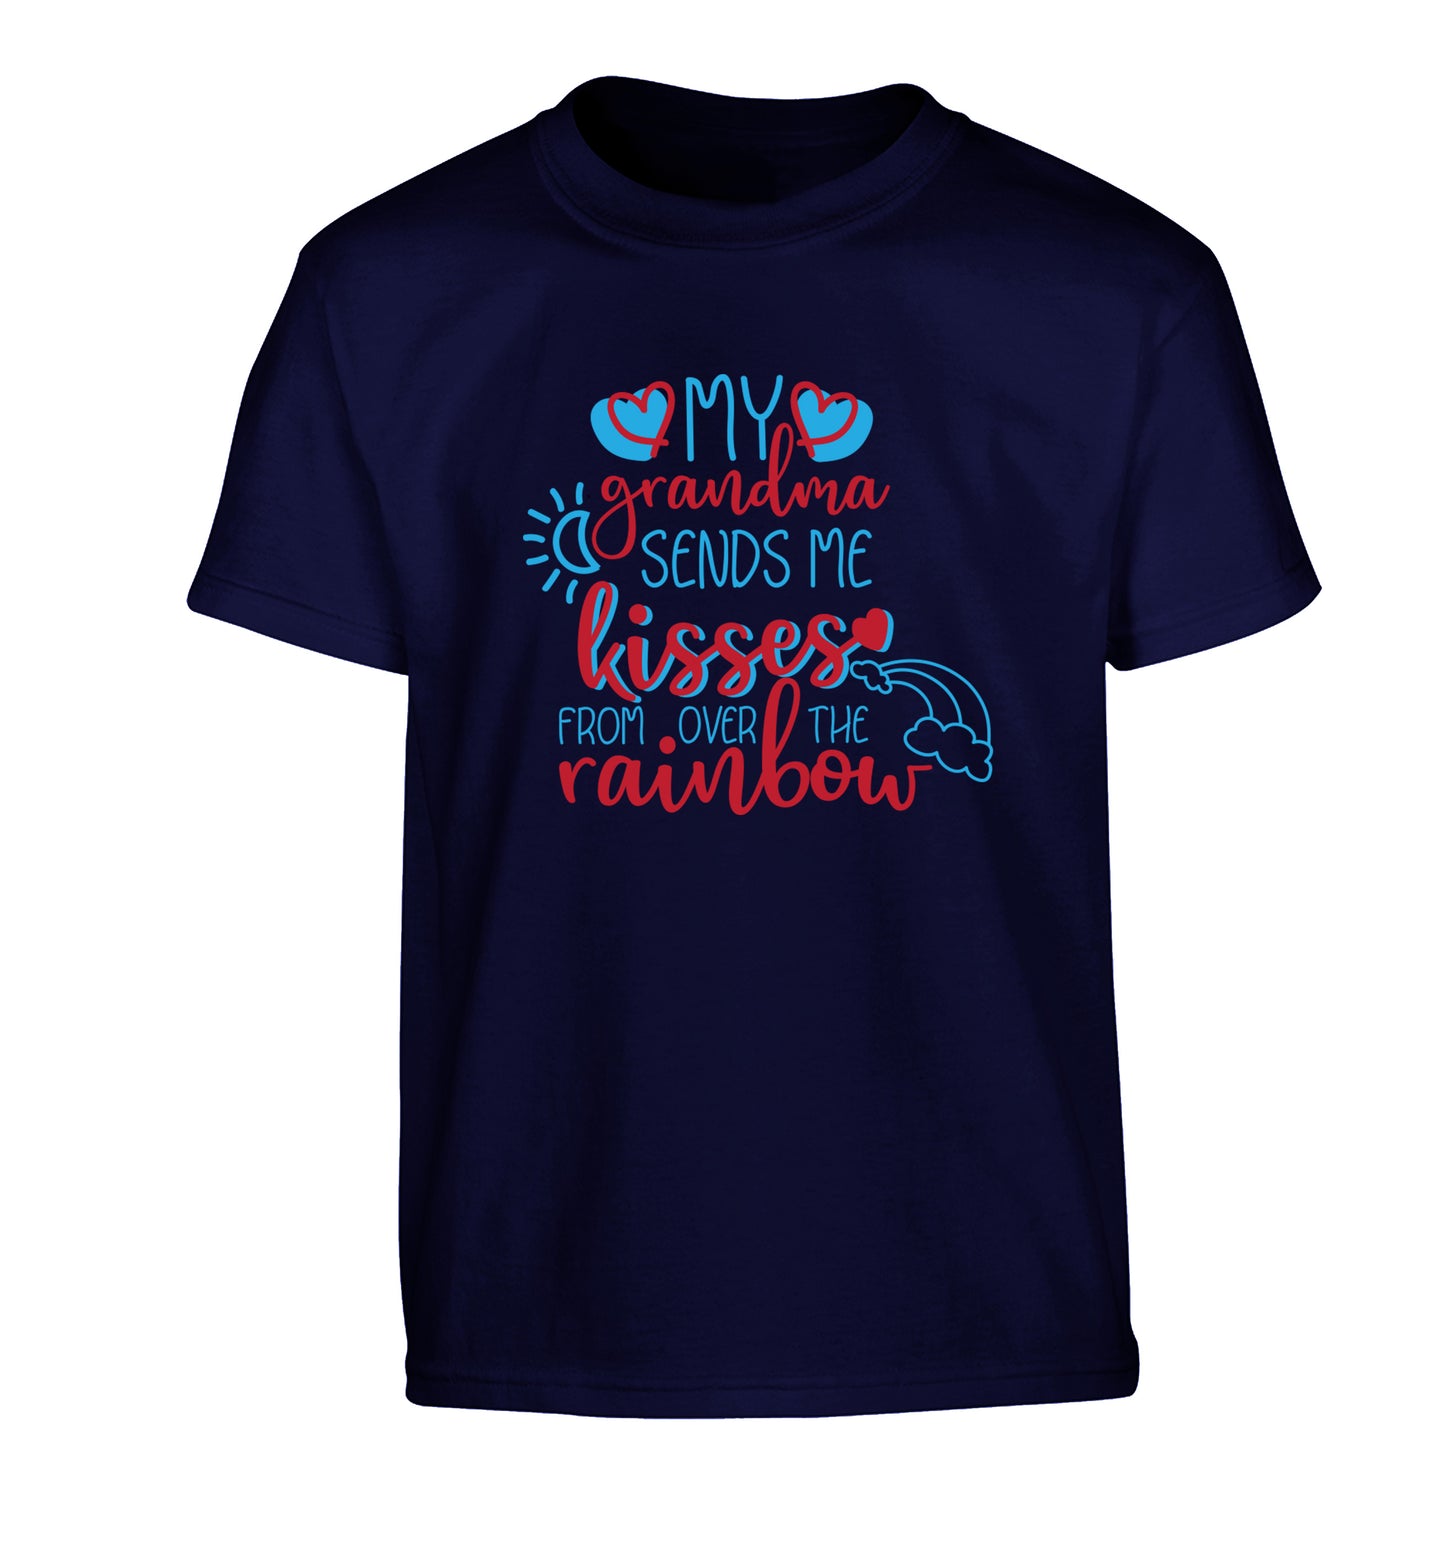 My grandma sends me kisses from over the rainbow Children's navy Tshirt 12-13 Years